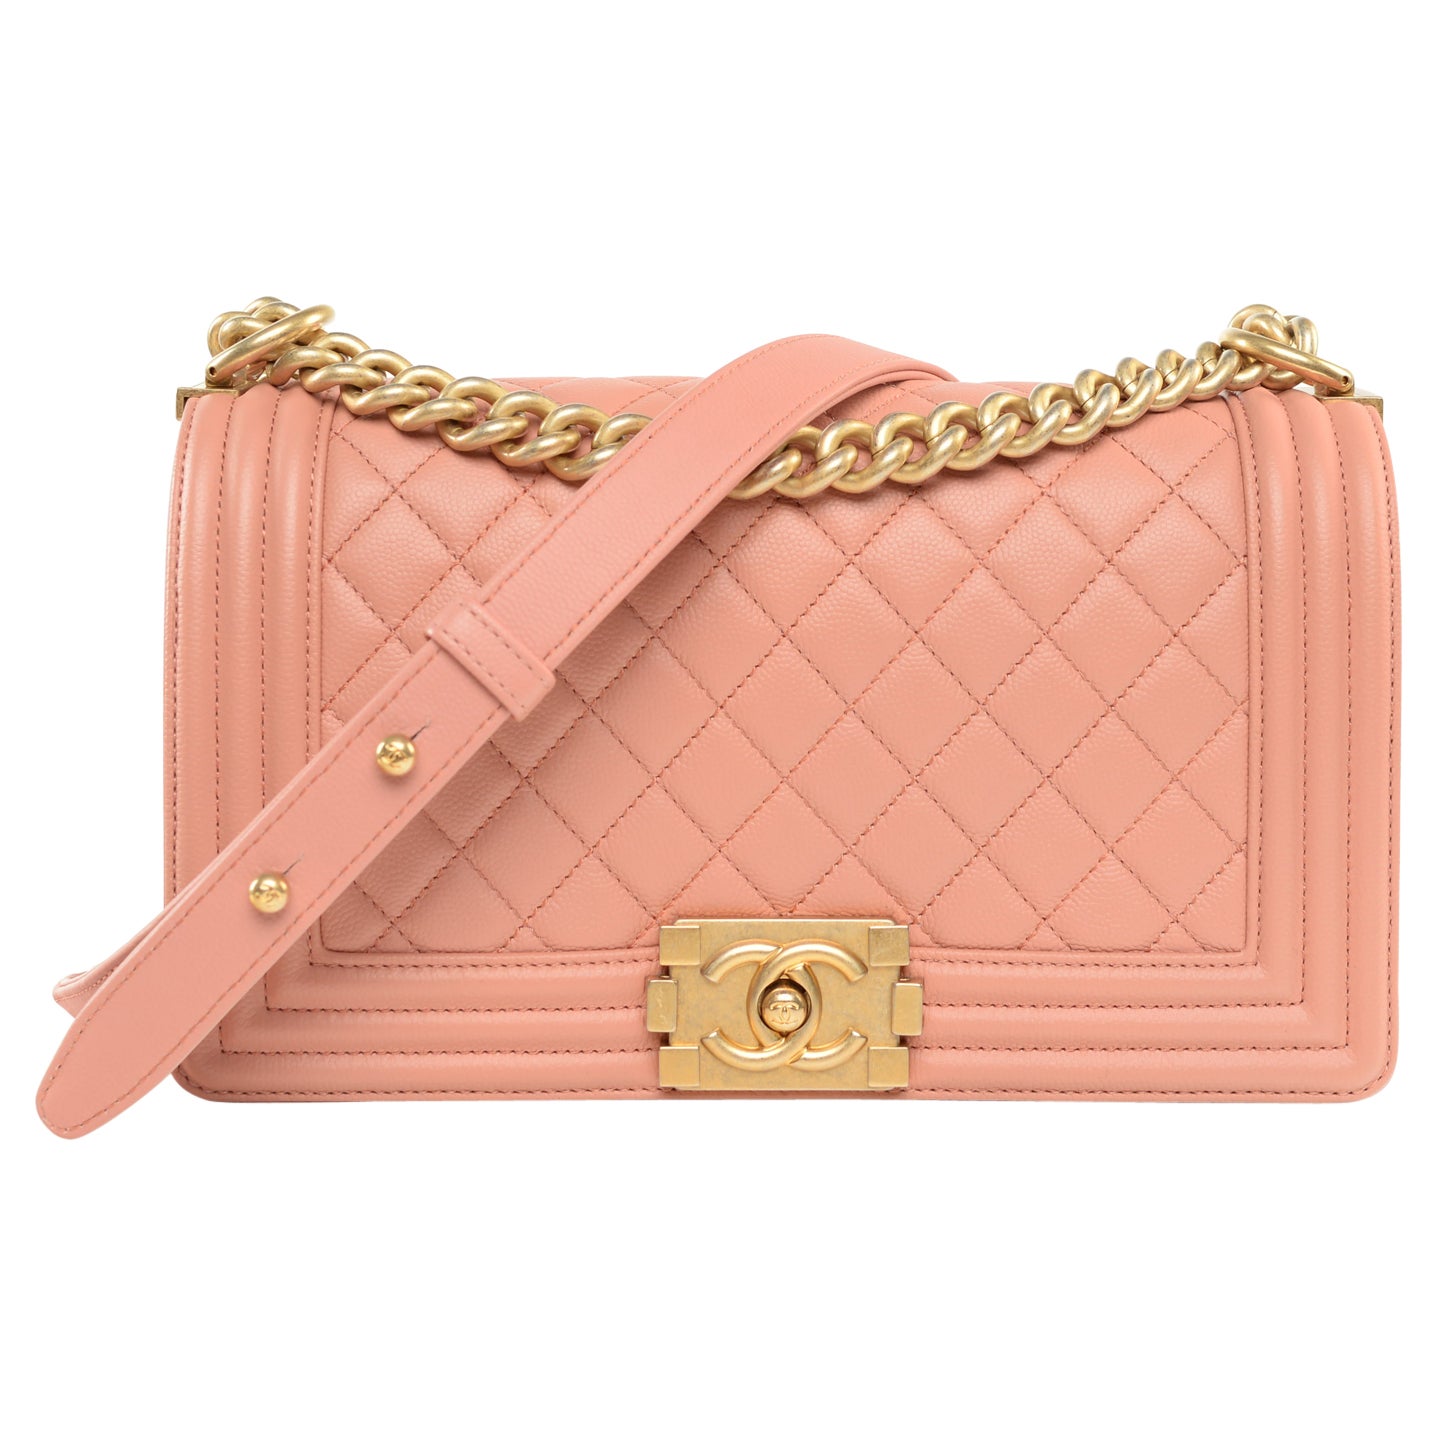 CHANEL  NUDE LIGHT PINK SMALL BOY BAG IN PATENT LEATHER WITH GOLD